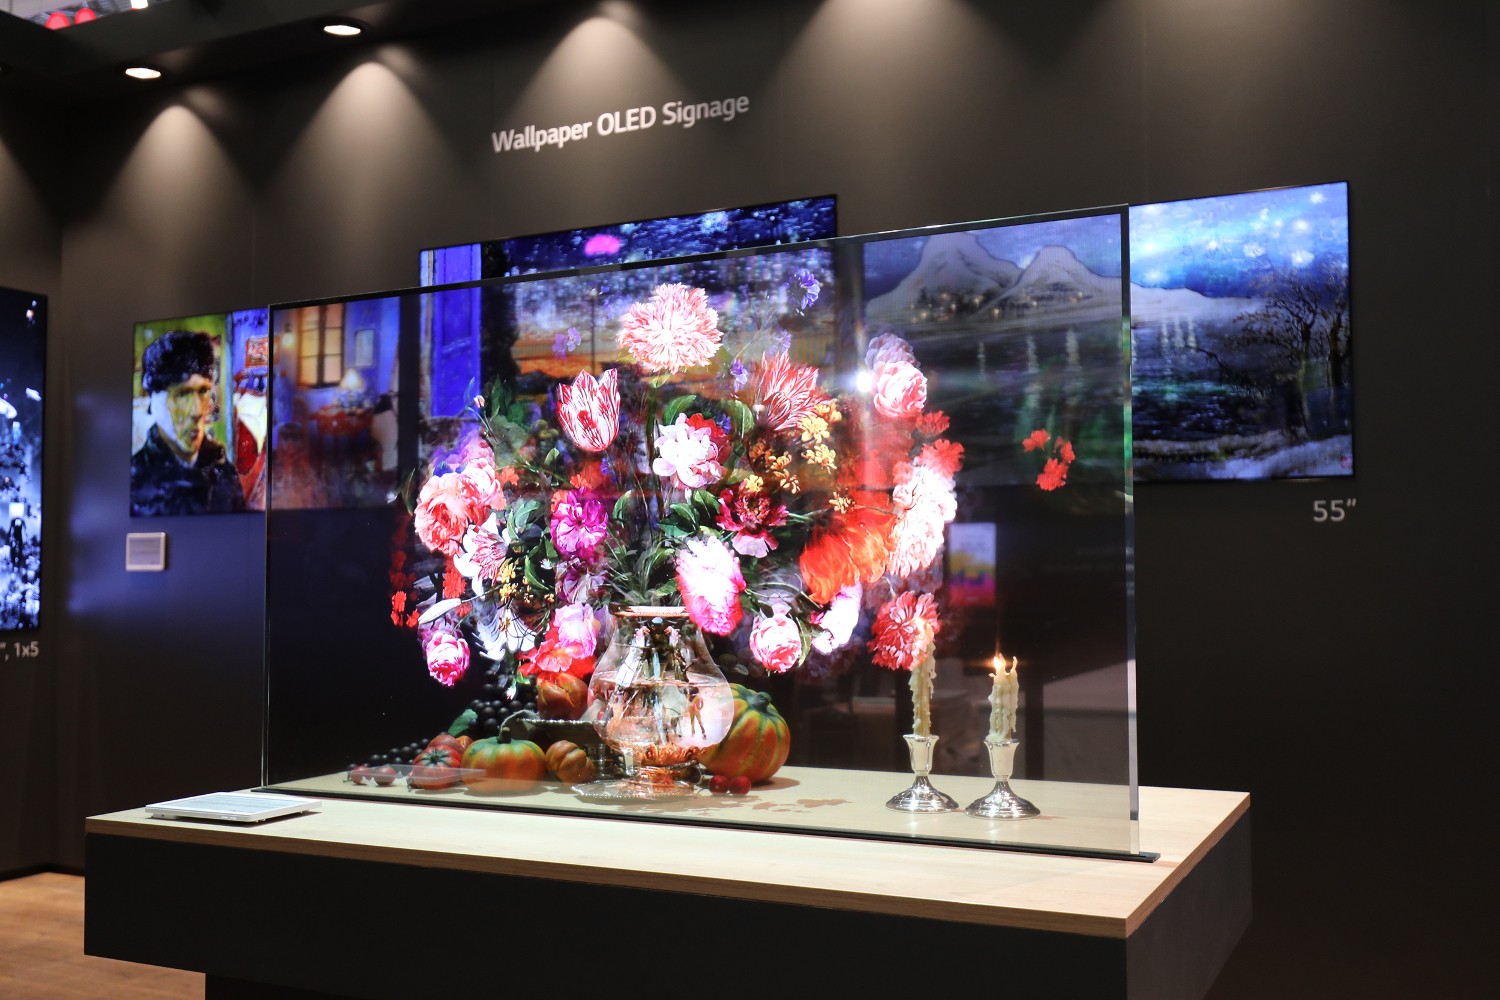 LG’s Wallpaper OLED signage presented at ISE 2019.